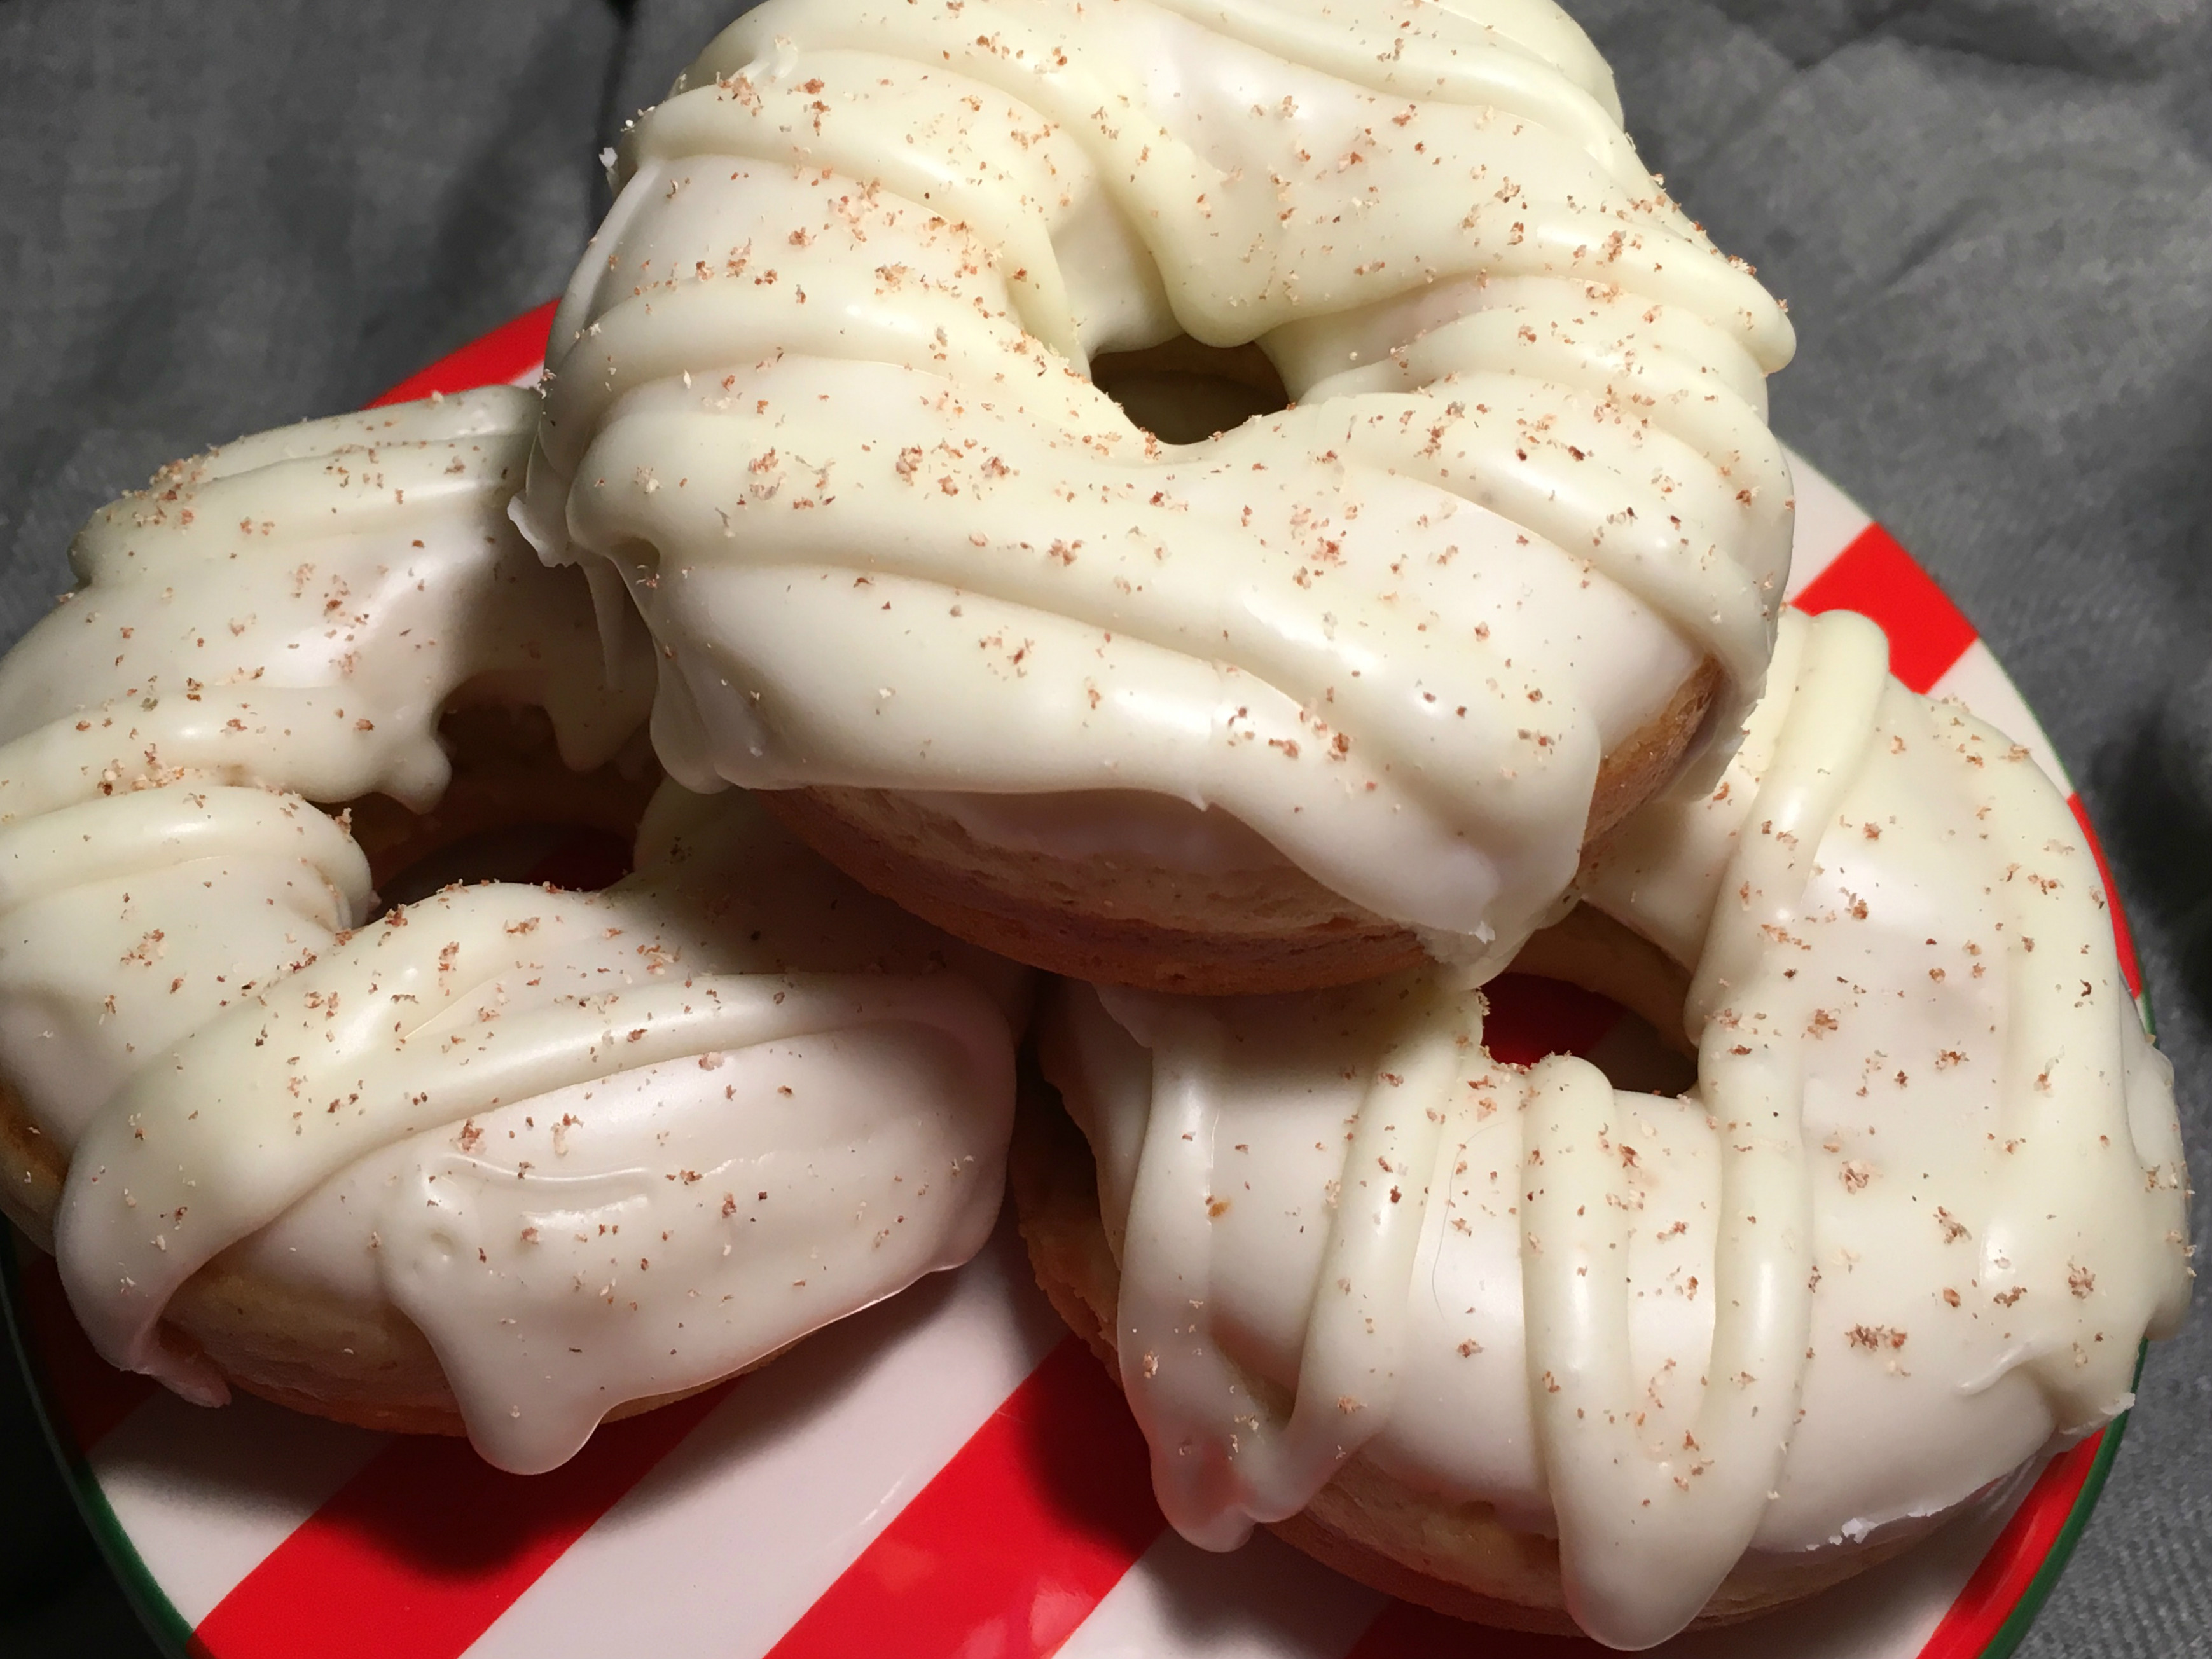 Baked Eggnog Doughnuts with Rum Glaze - Sugar and Spice